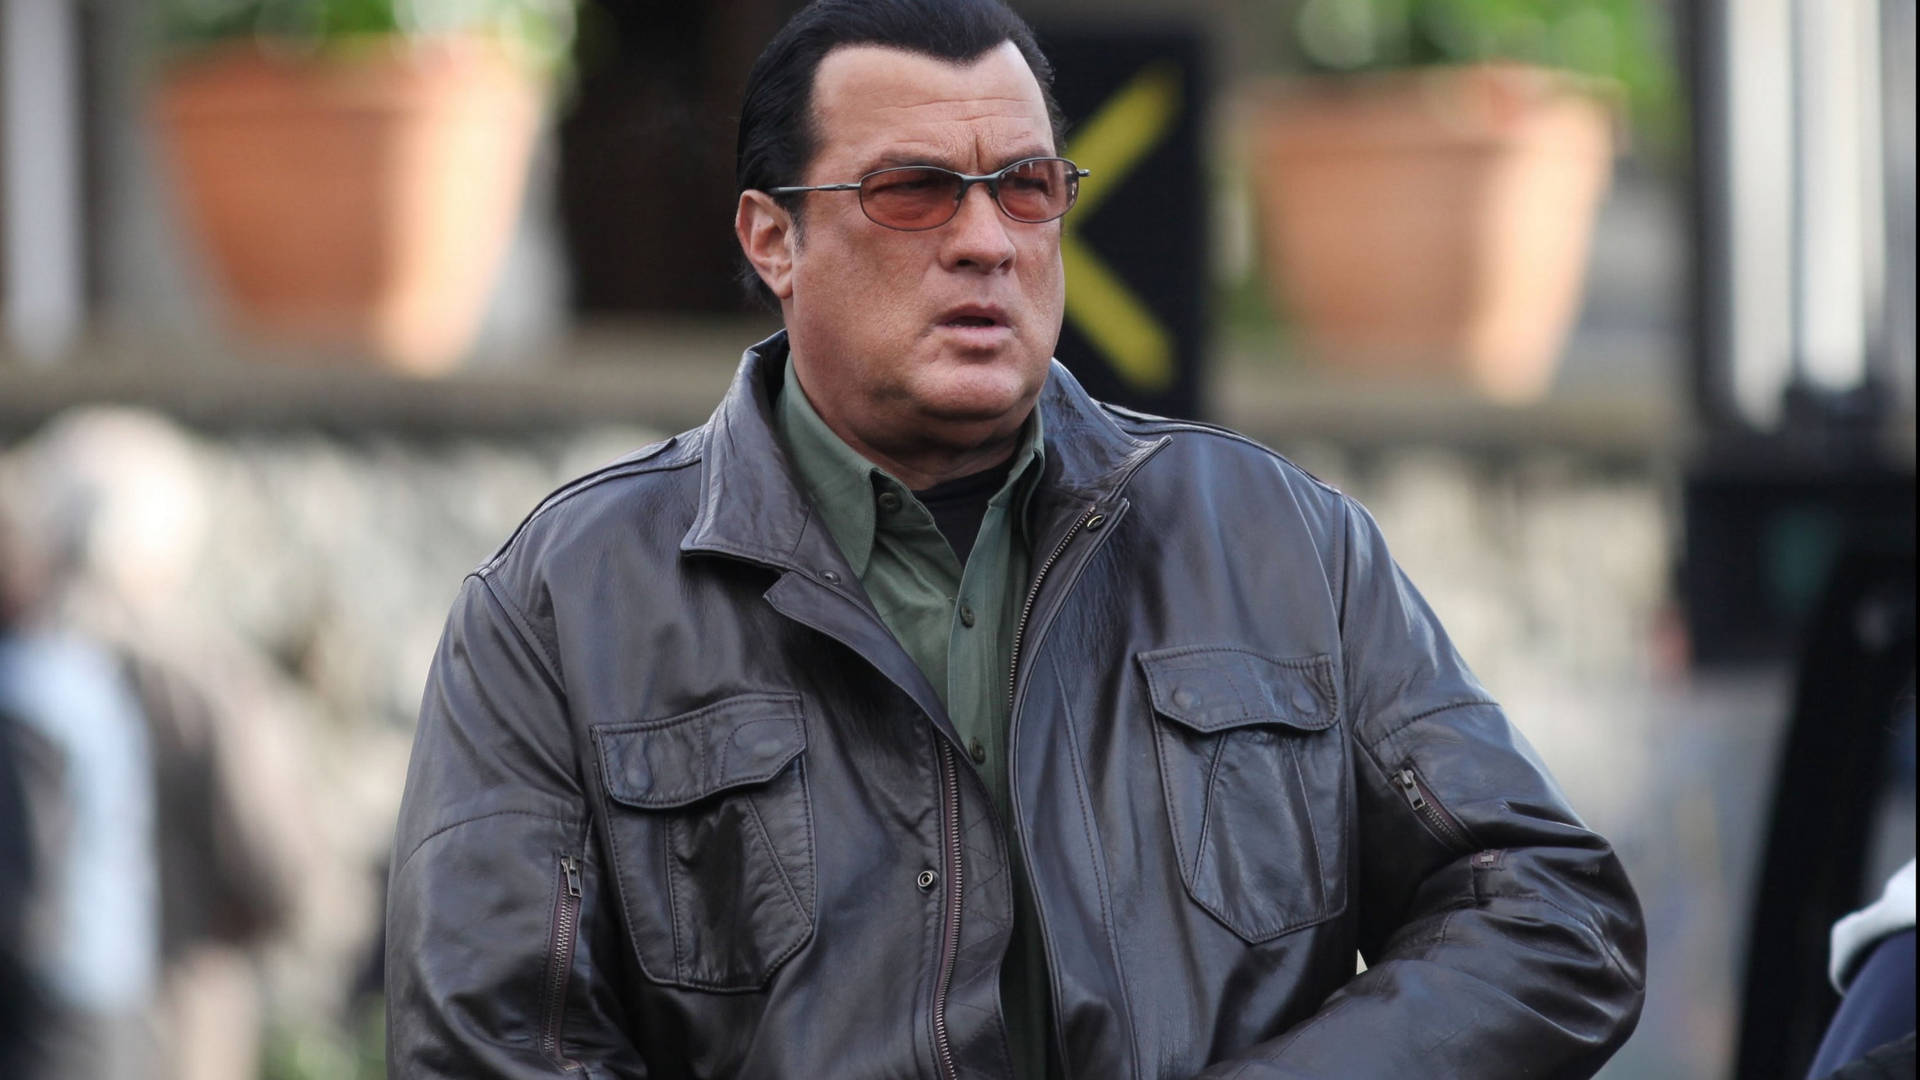 Steven Seagal: An Embodiment of Action and Activism Wallpaper